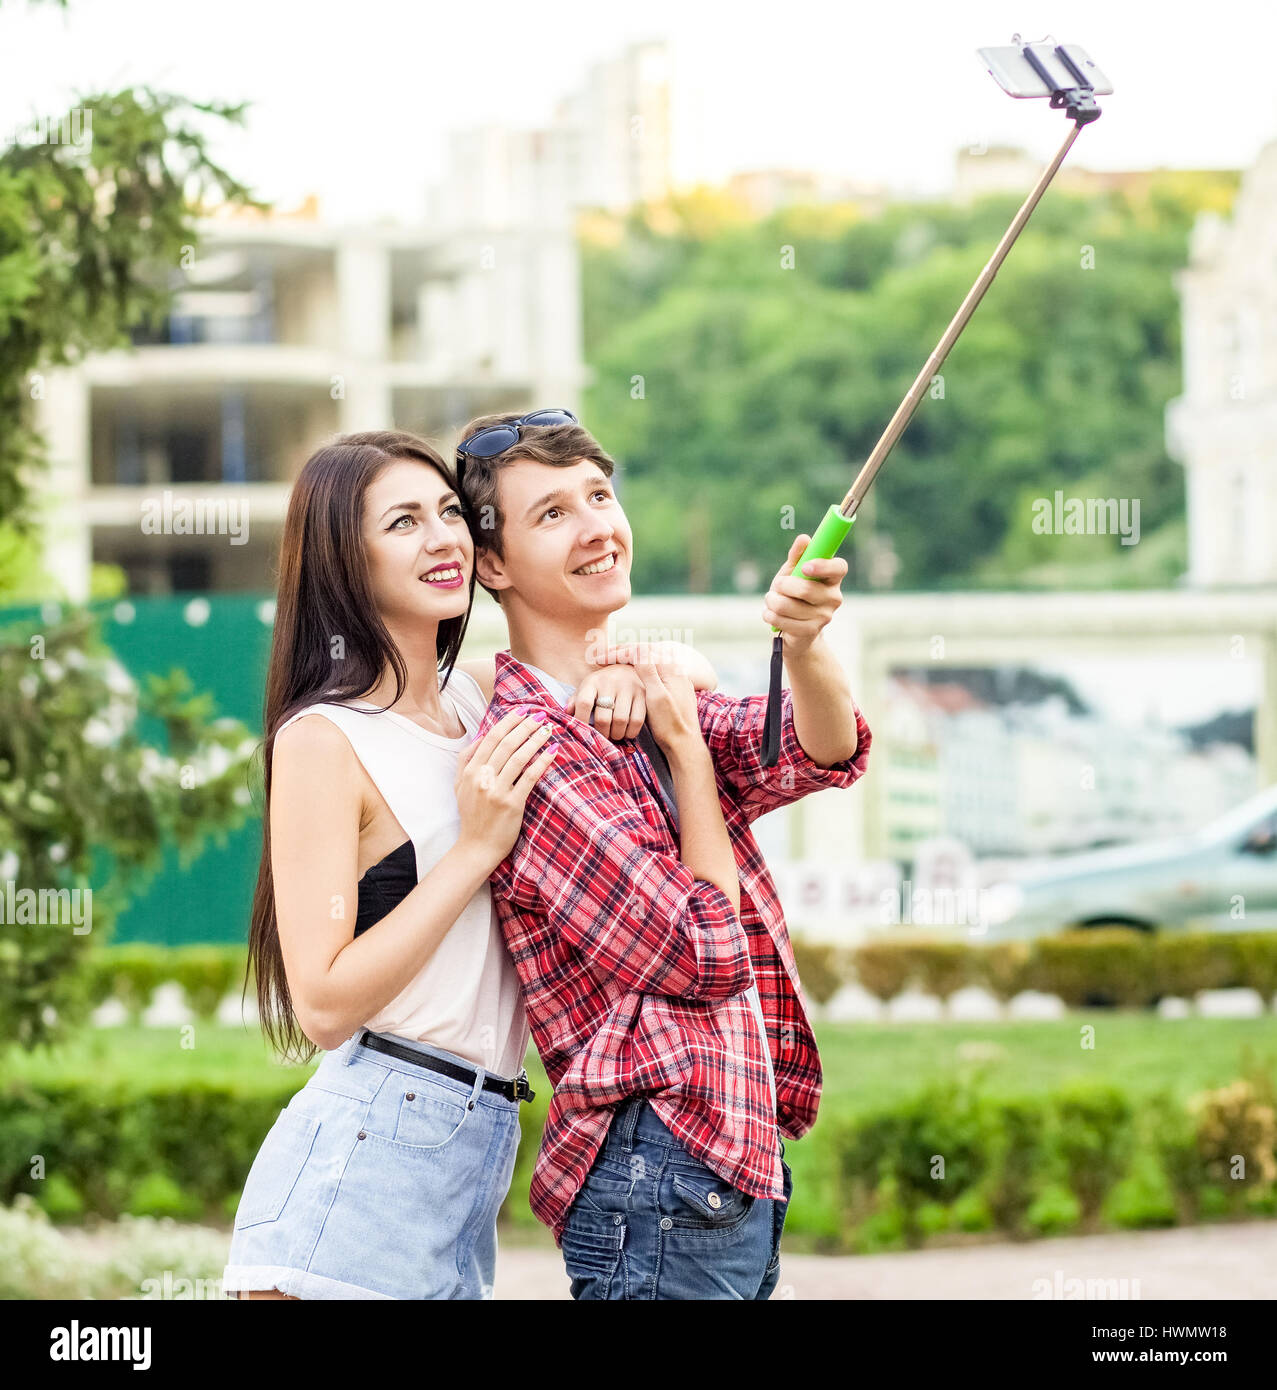 happy young tourists couple taking a selfie with smartphone on the monopod in city. The man is holding the stick and shooting looking at phone with ha Stock Photo